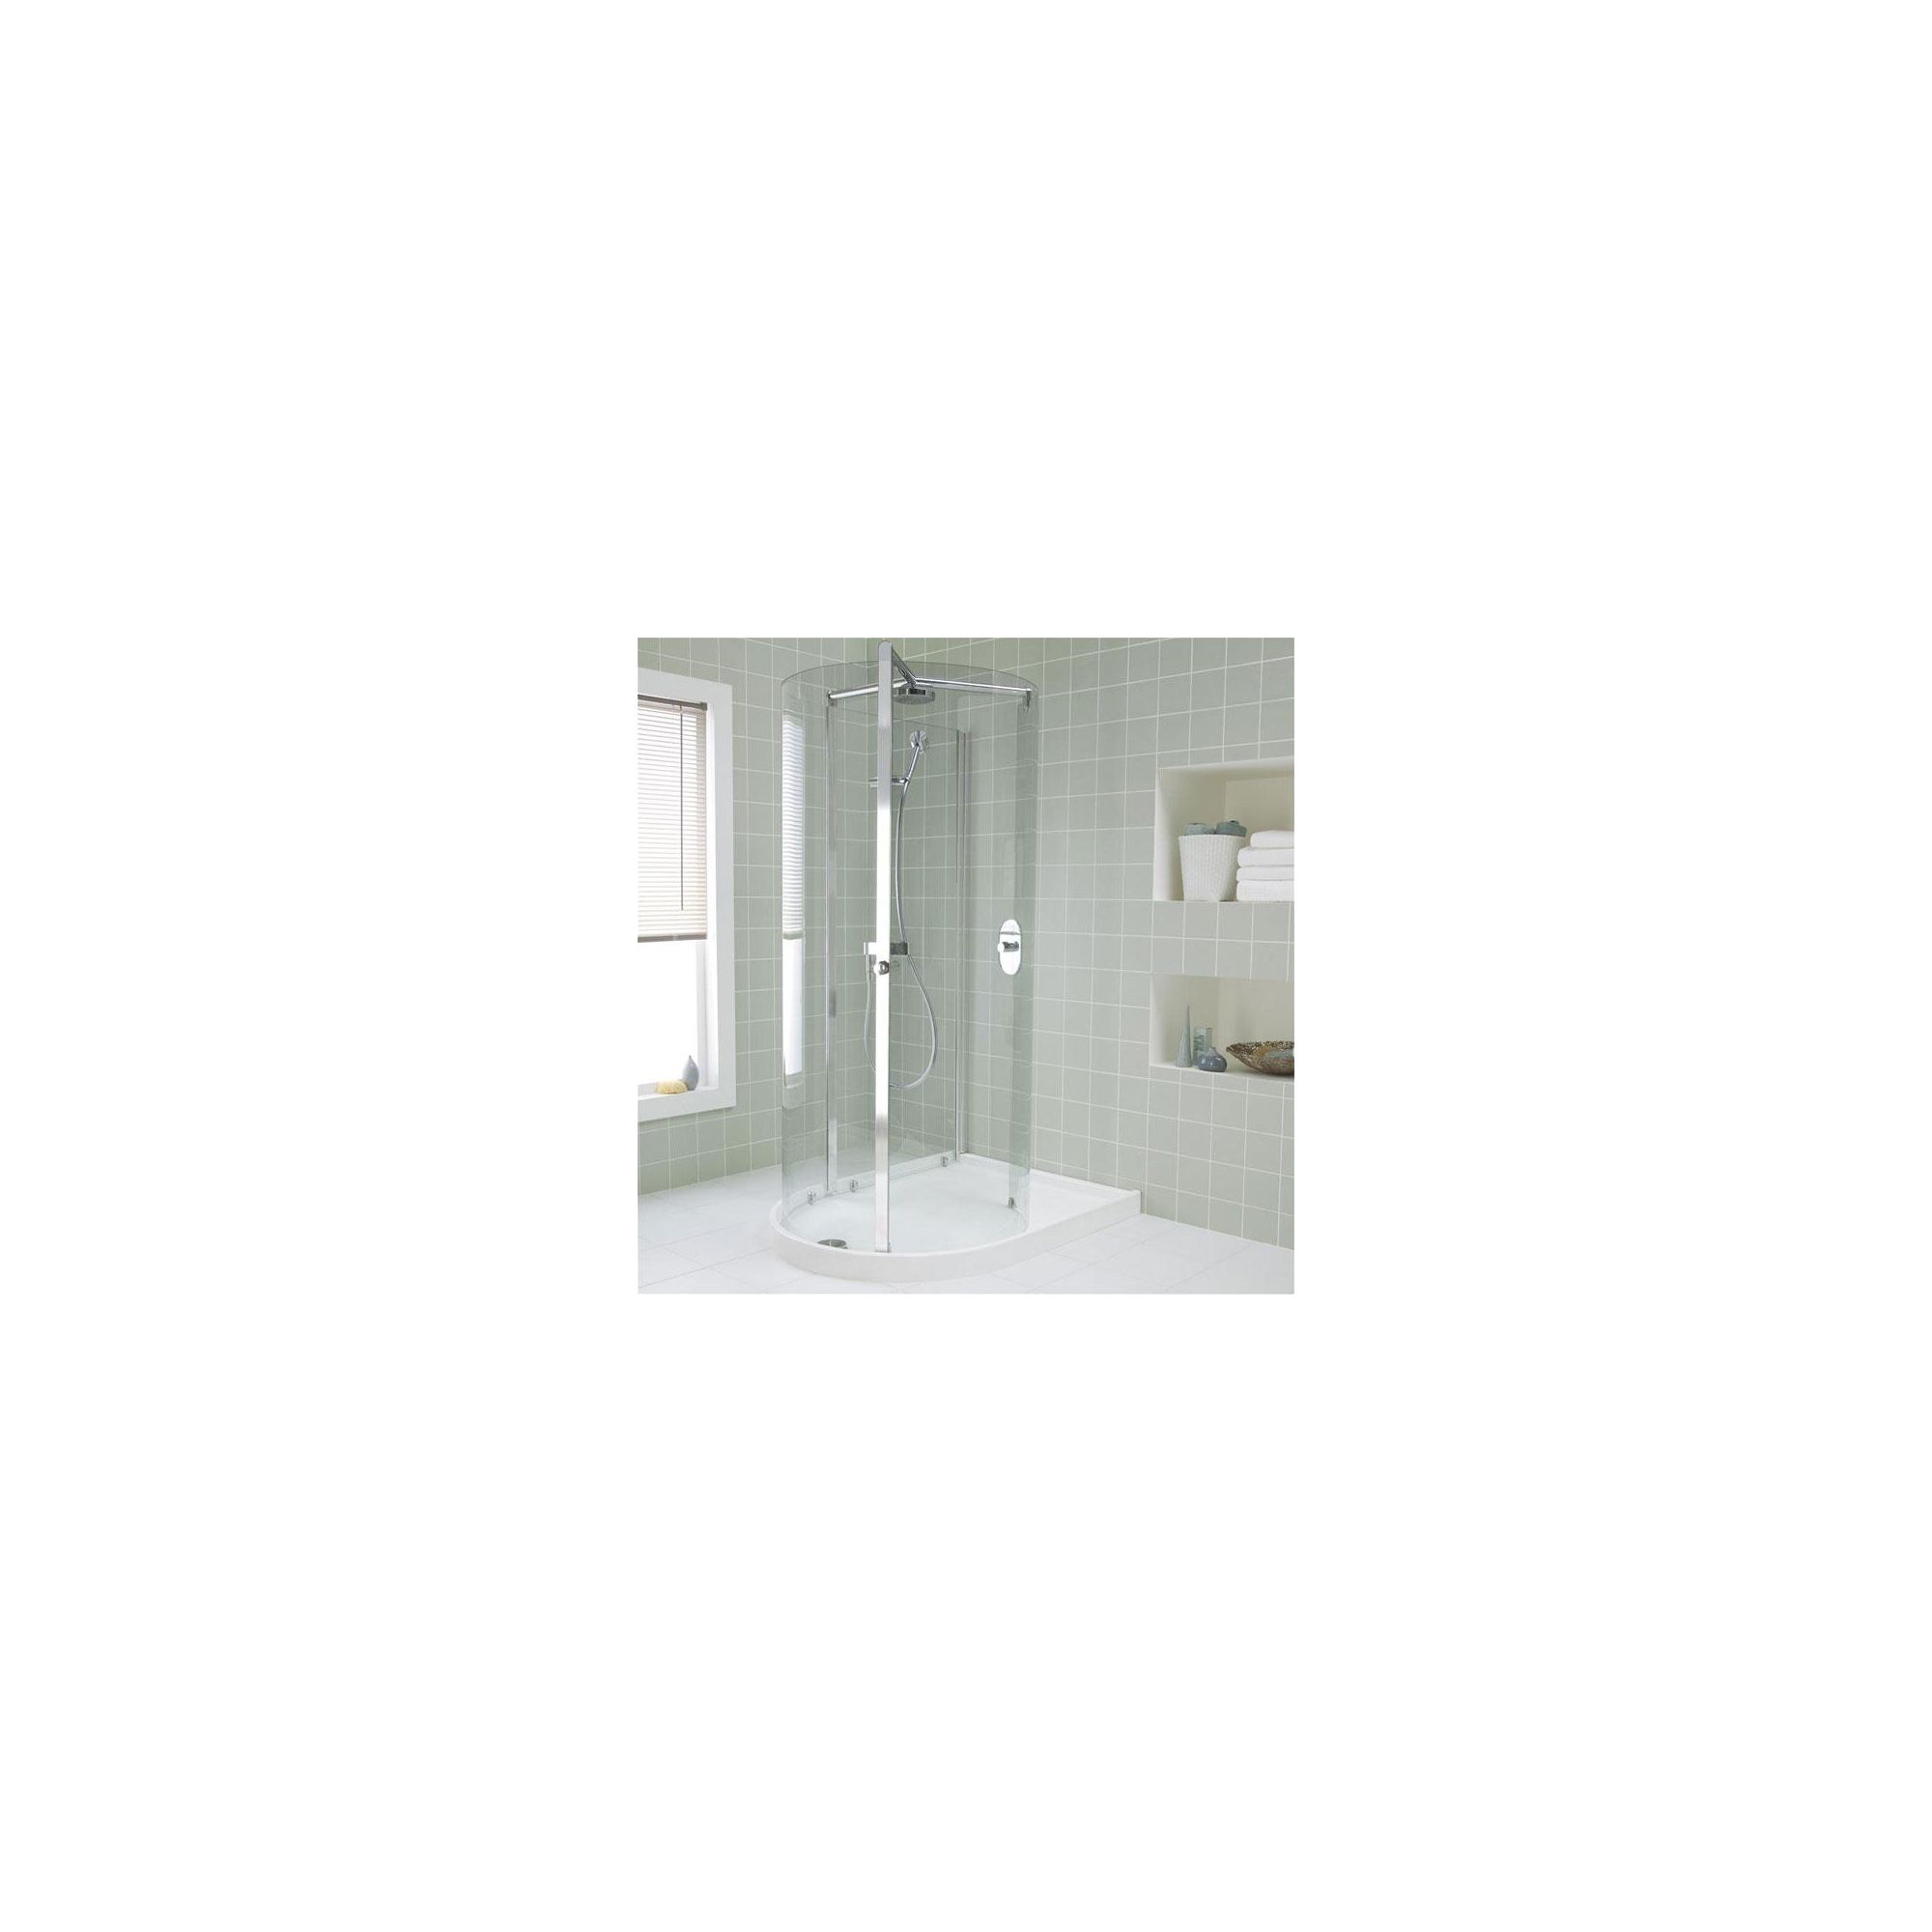 Ideal Standard Serenis Peninsular 360 Degree Shower Enclosure, including Fittings, 1532mm x 1100mm, Low Profile Tray, Left Handed at Tesco Direct